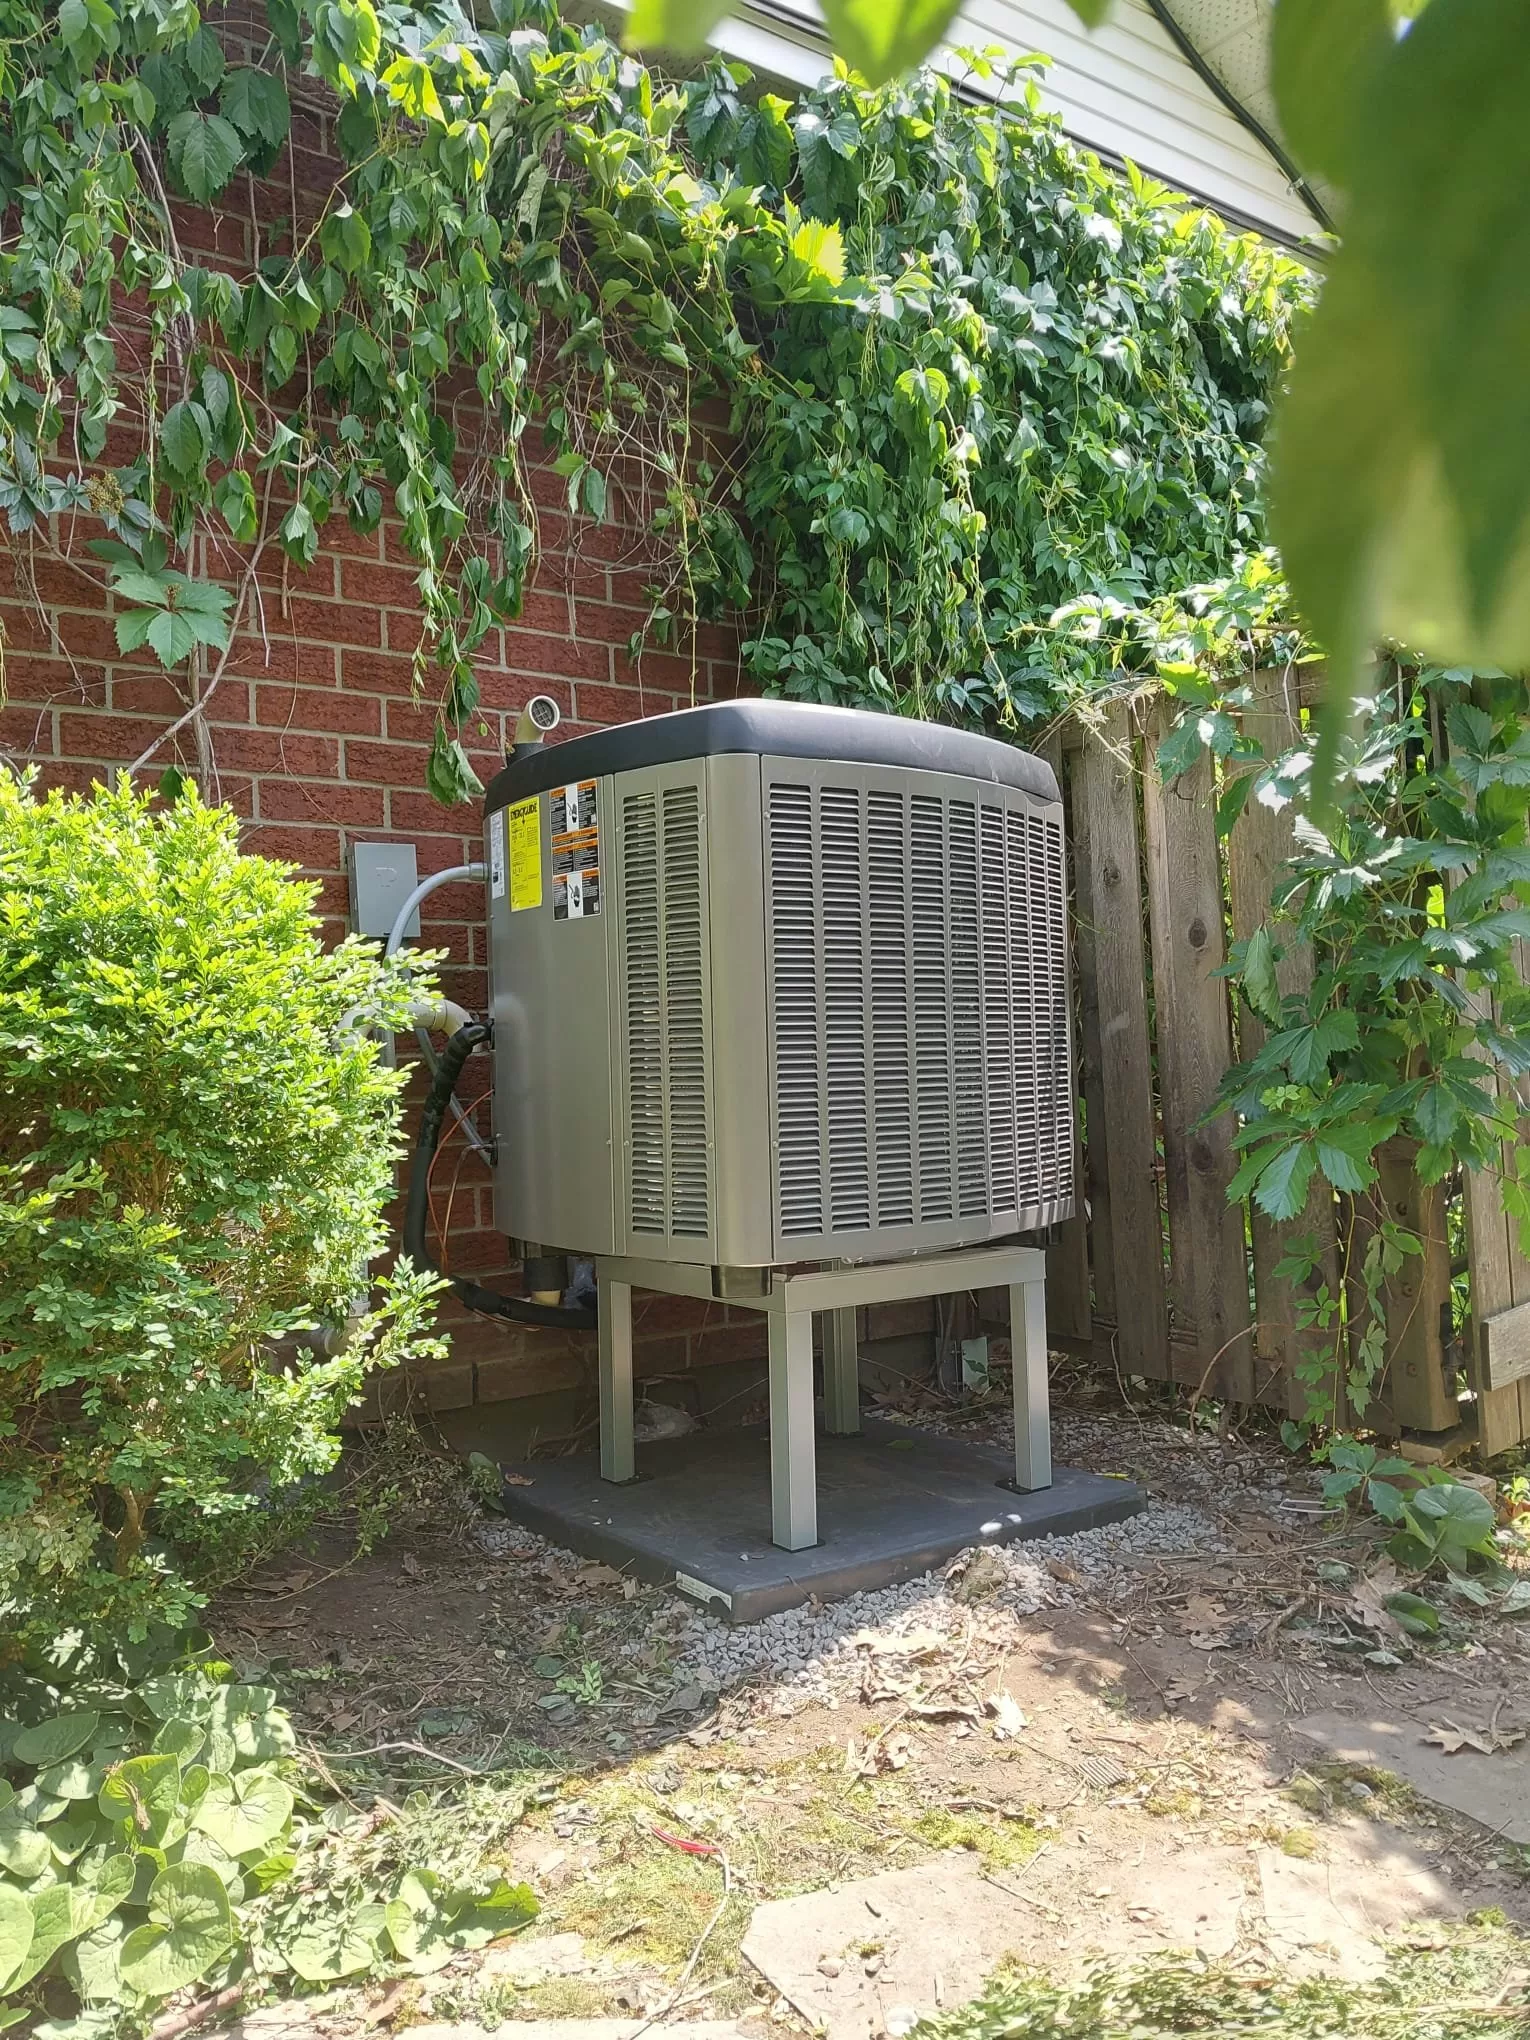 Lennox Heat Pump installed in Ottawa that qualifies for the Greener Home Rebate